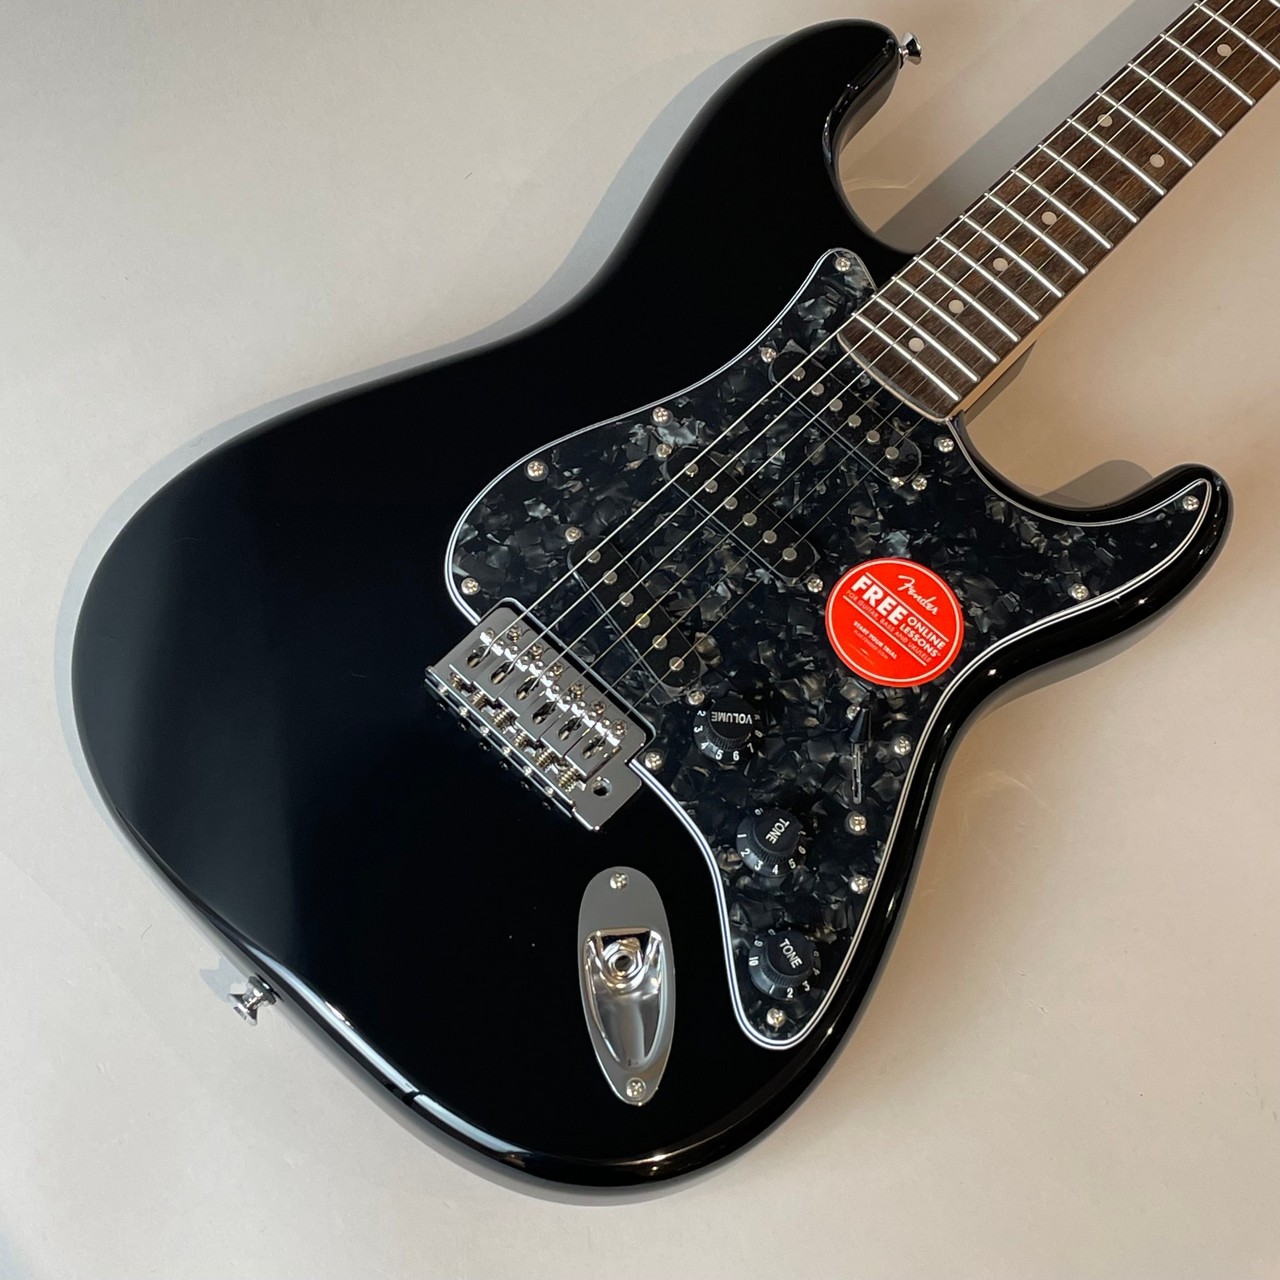 Squier by Fender FSR Affinity stratocaster Black Pearl ストラトキャスター エレキギター